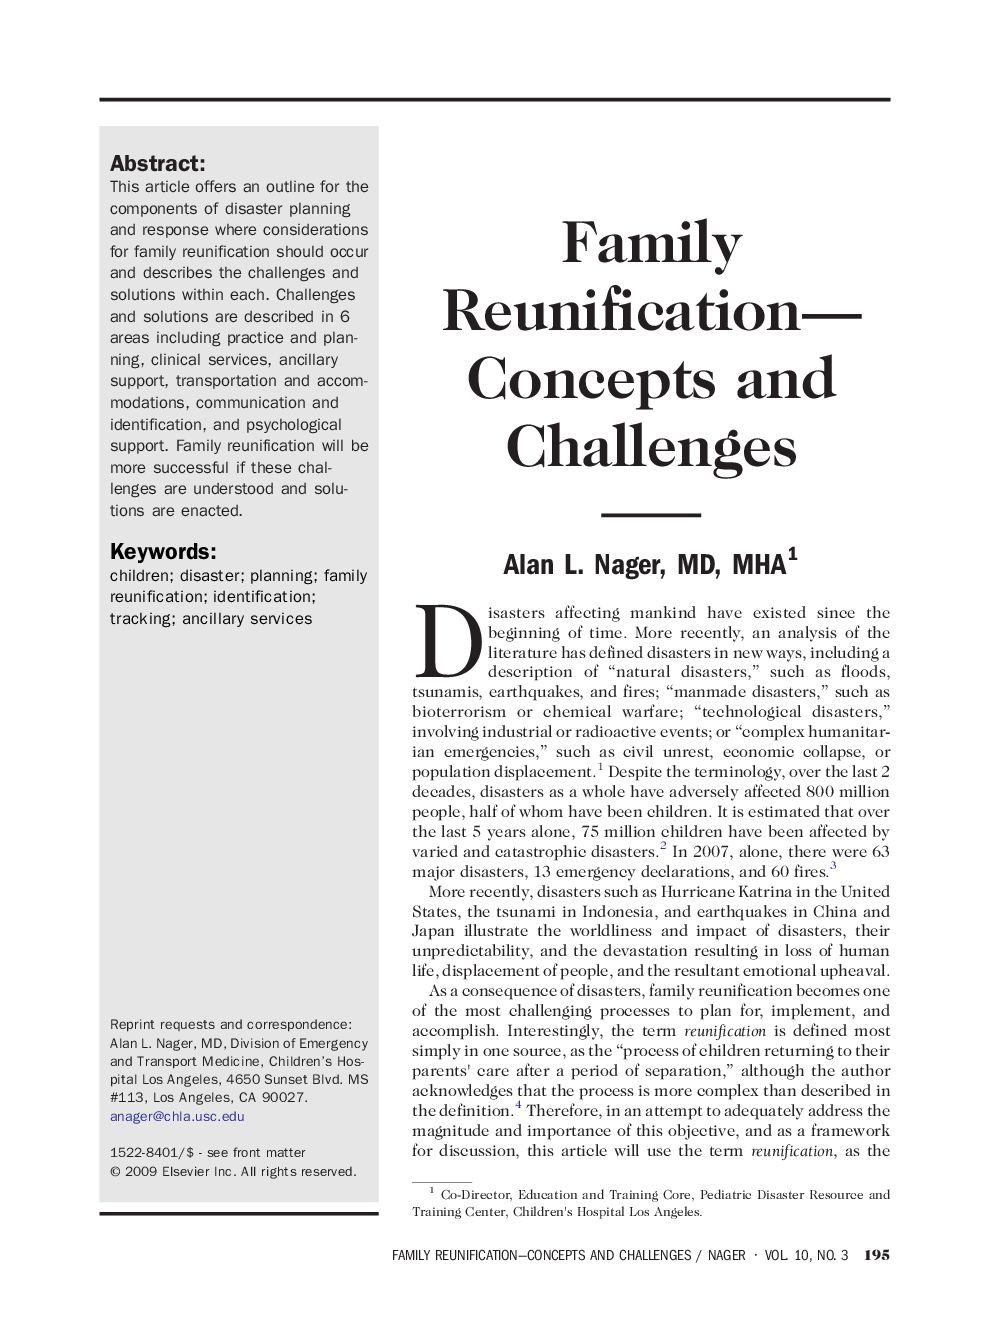 Family Reunification—Concepts and Challenges